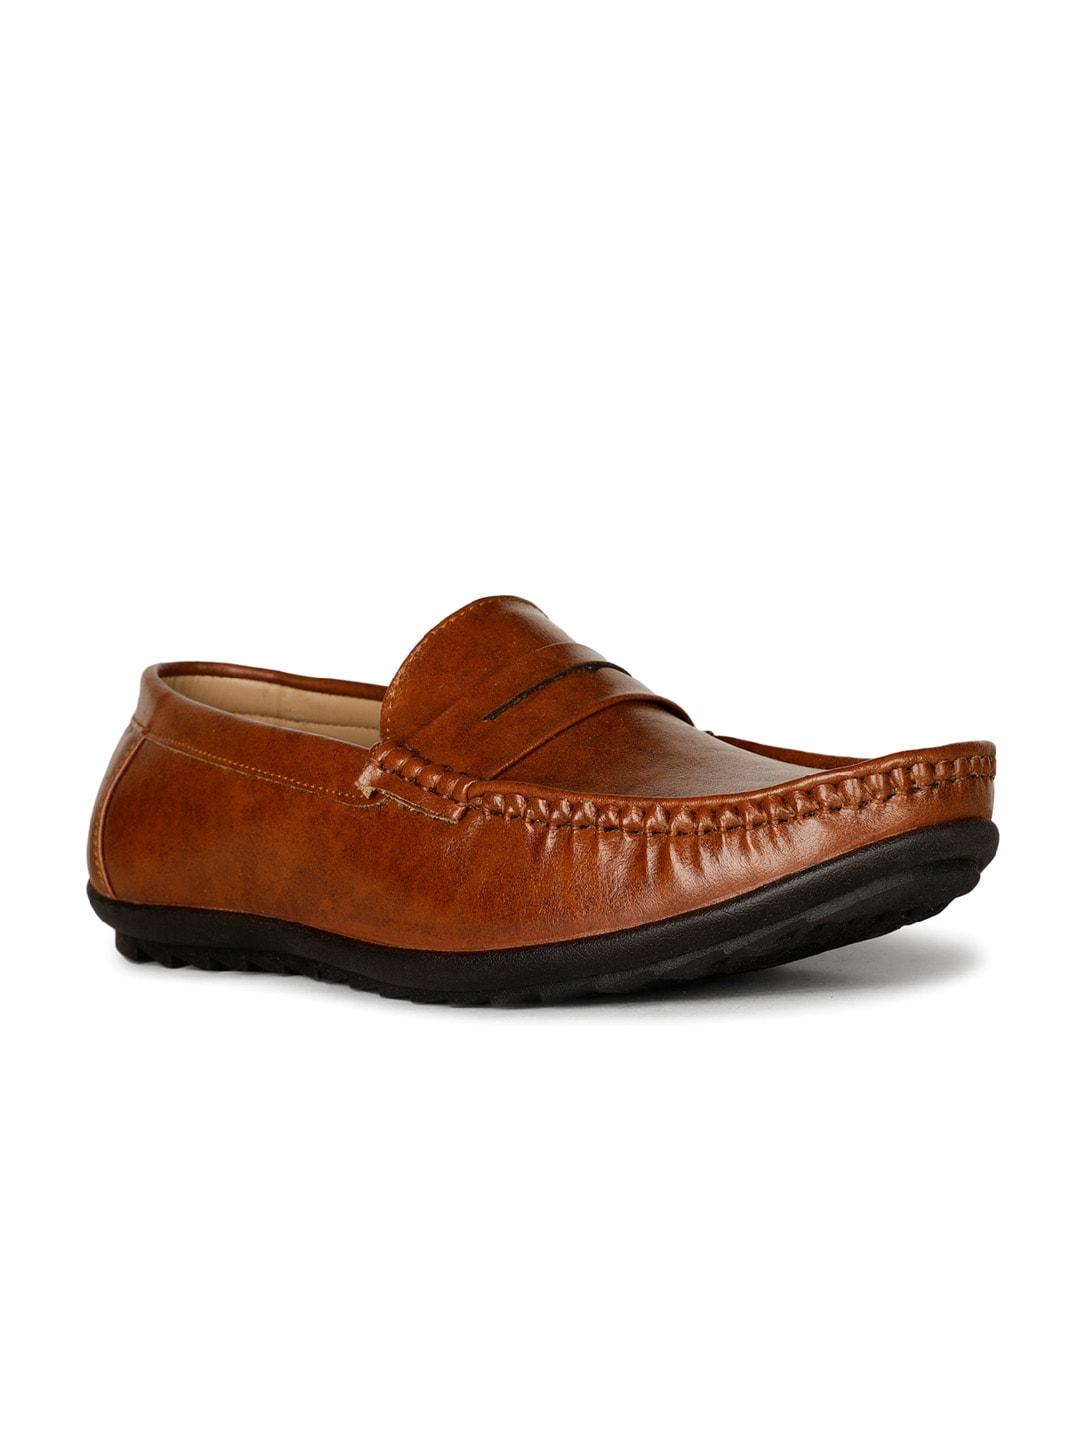 bata men comfort insole penny loafers